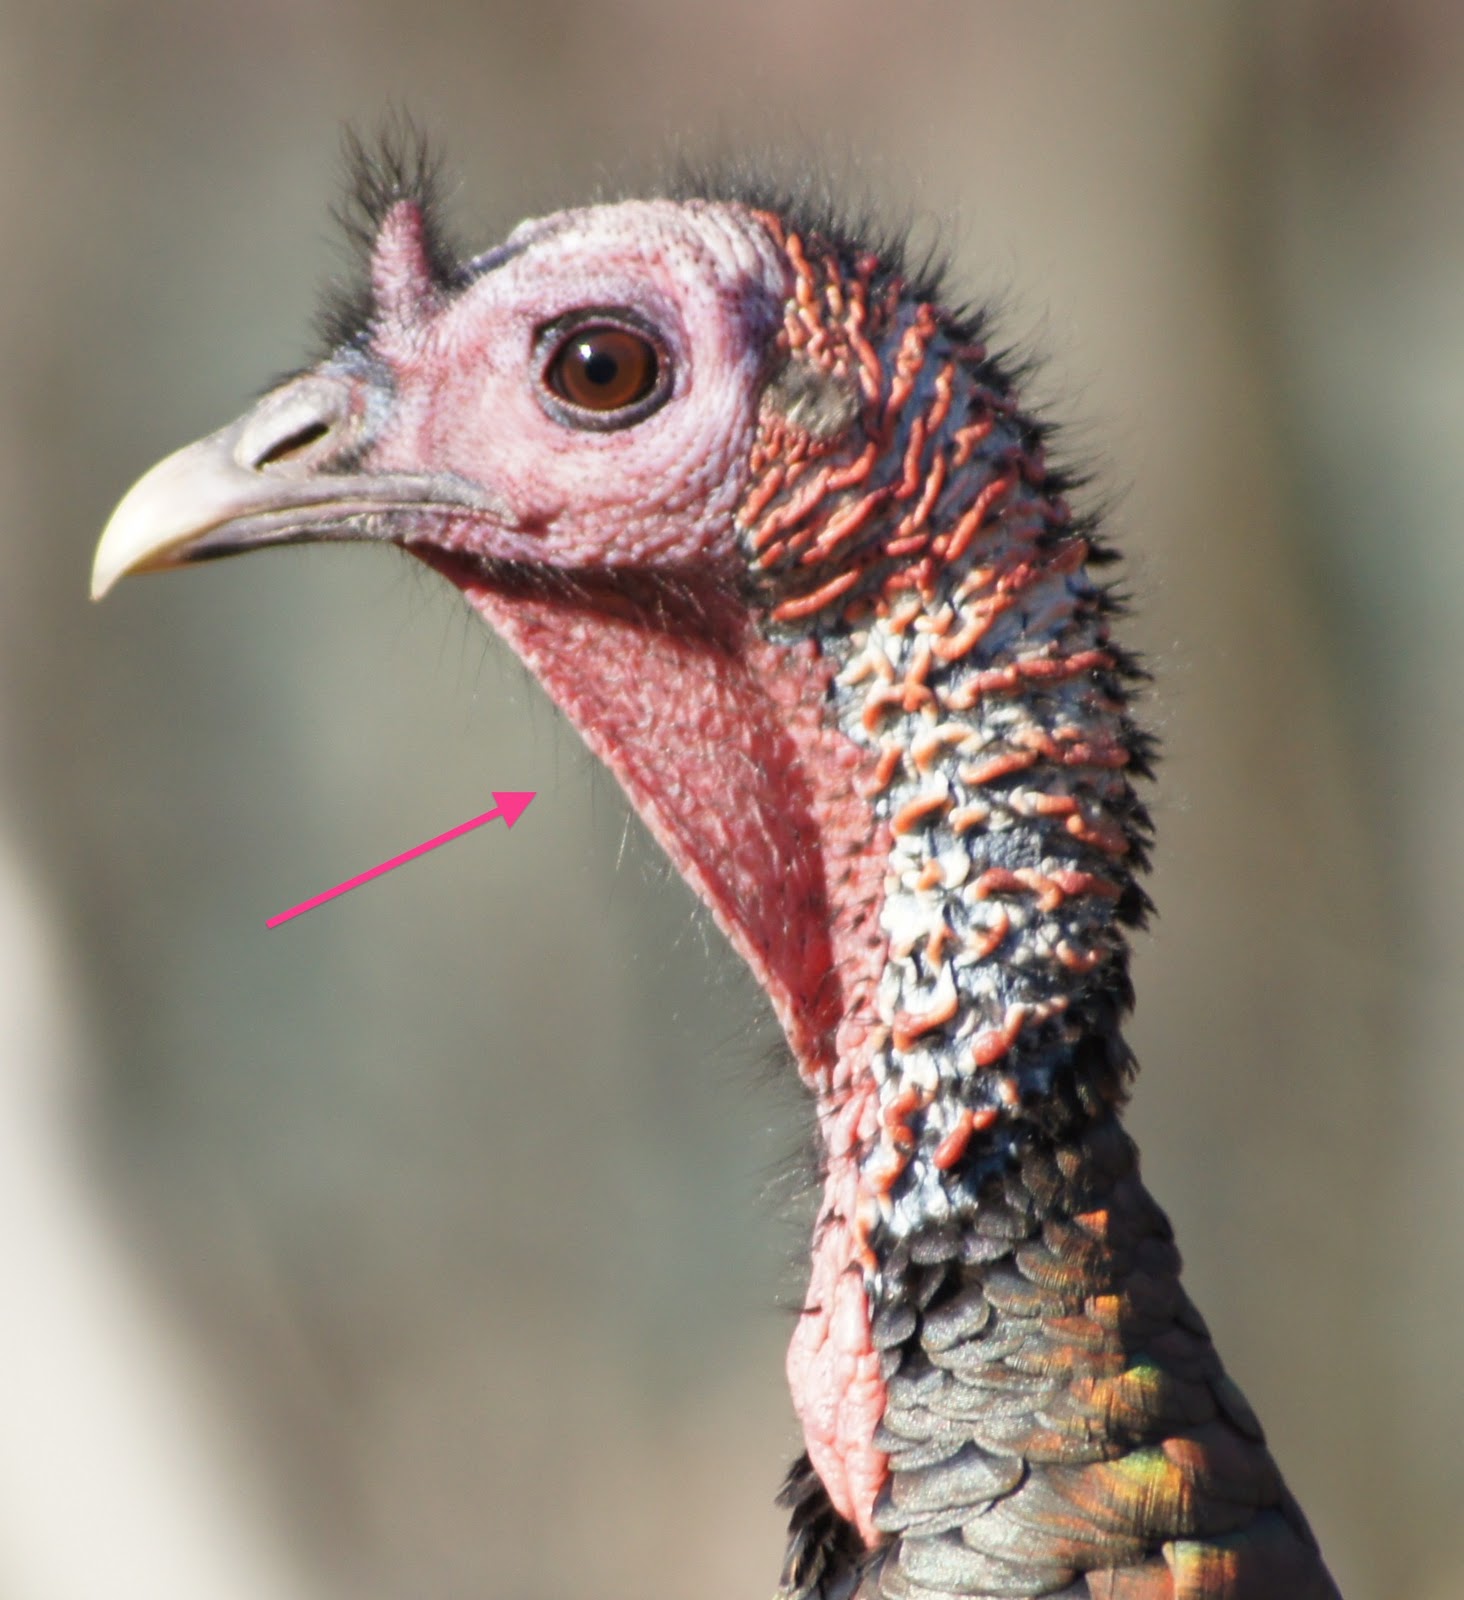 Do Turkeys Shed Their Feathers